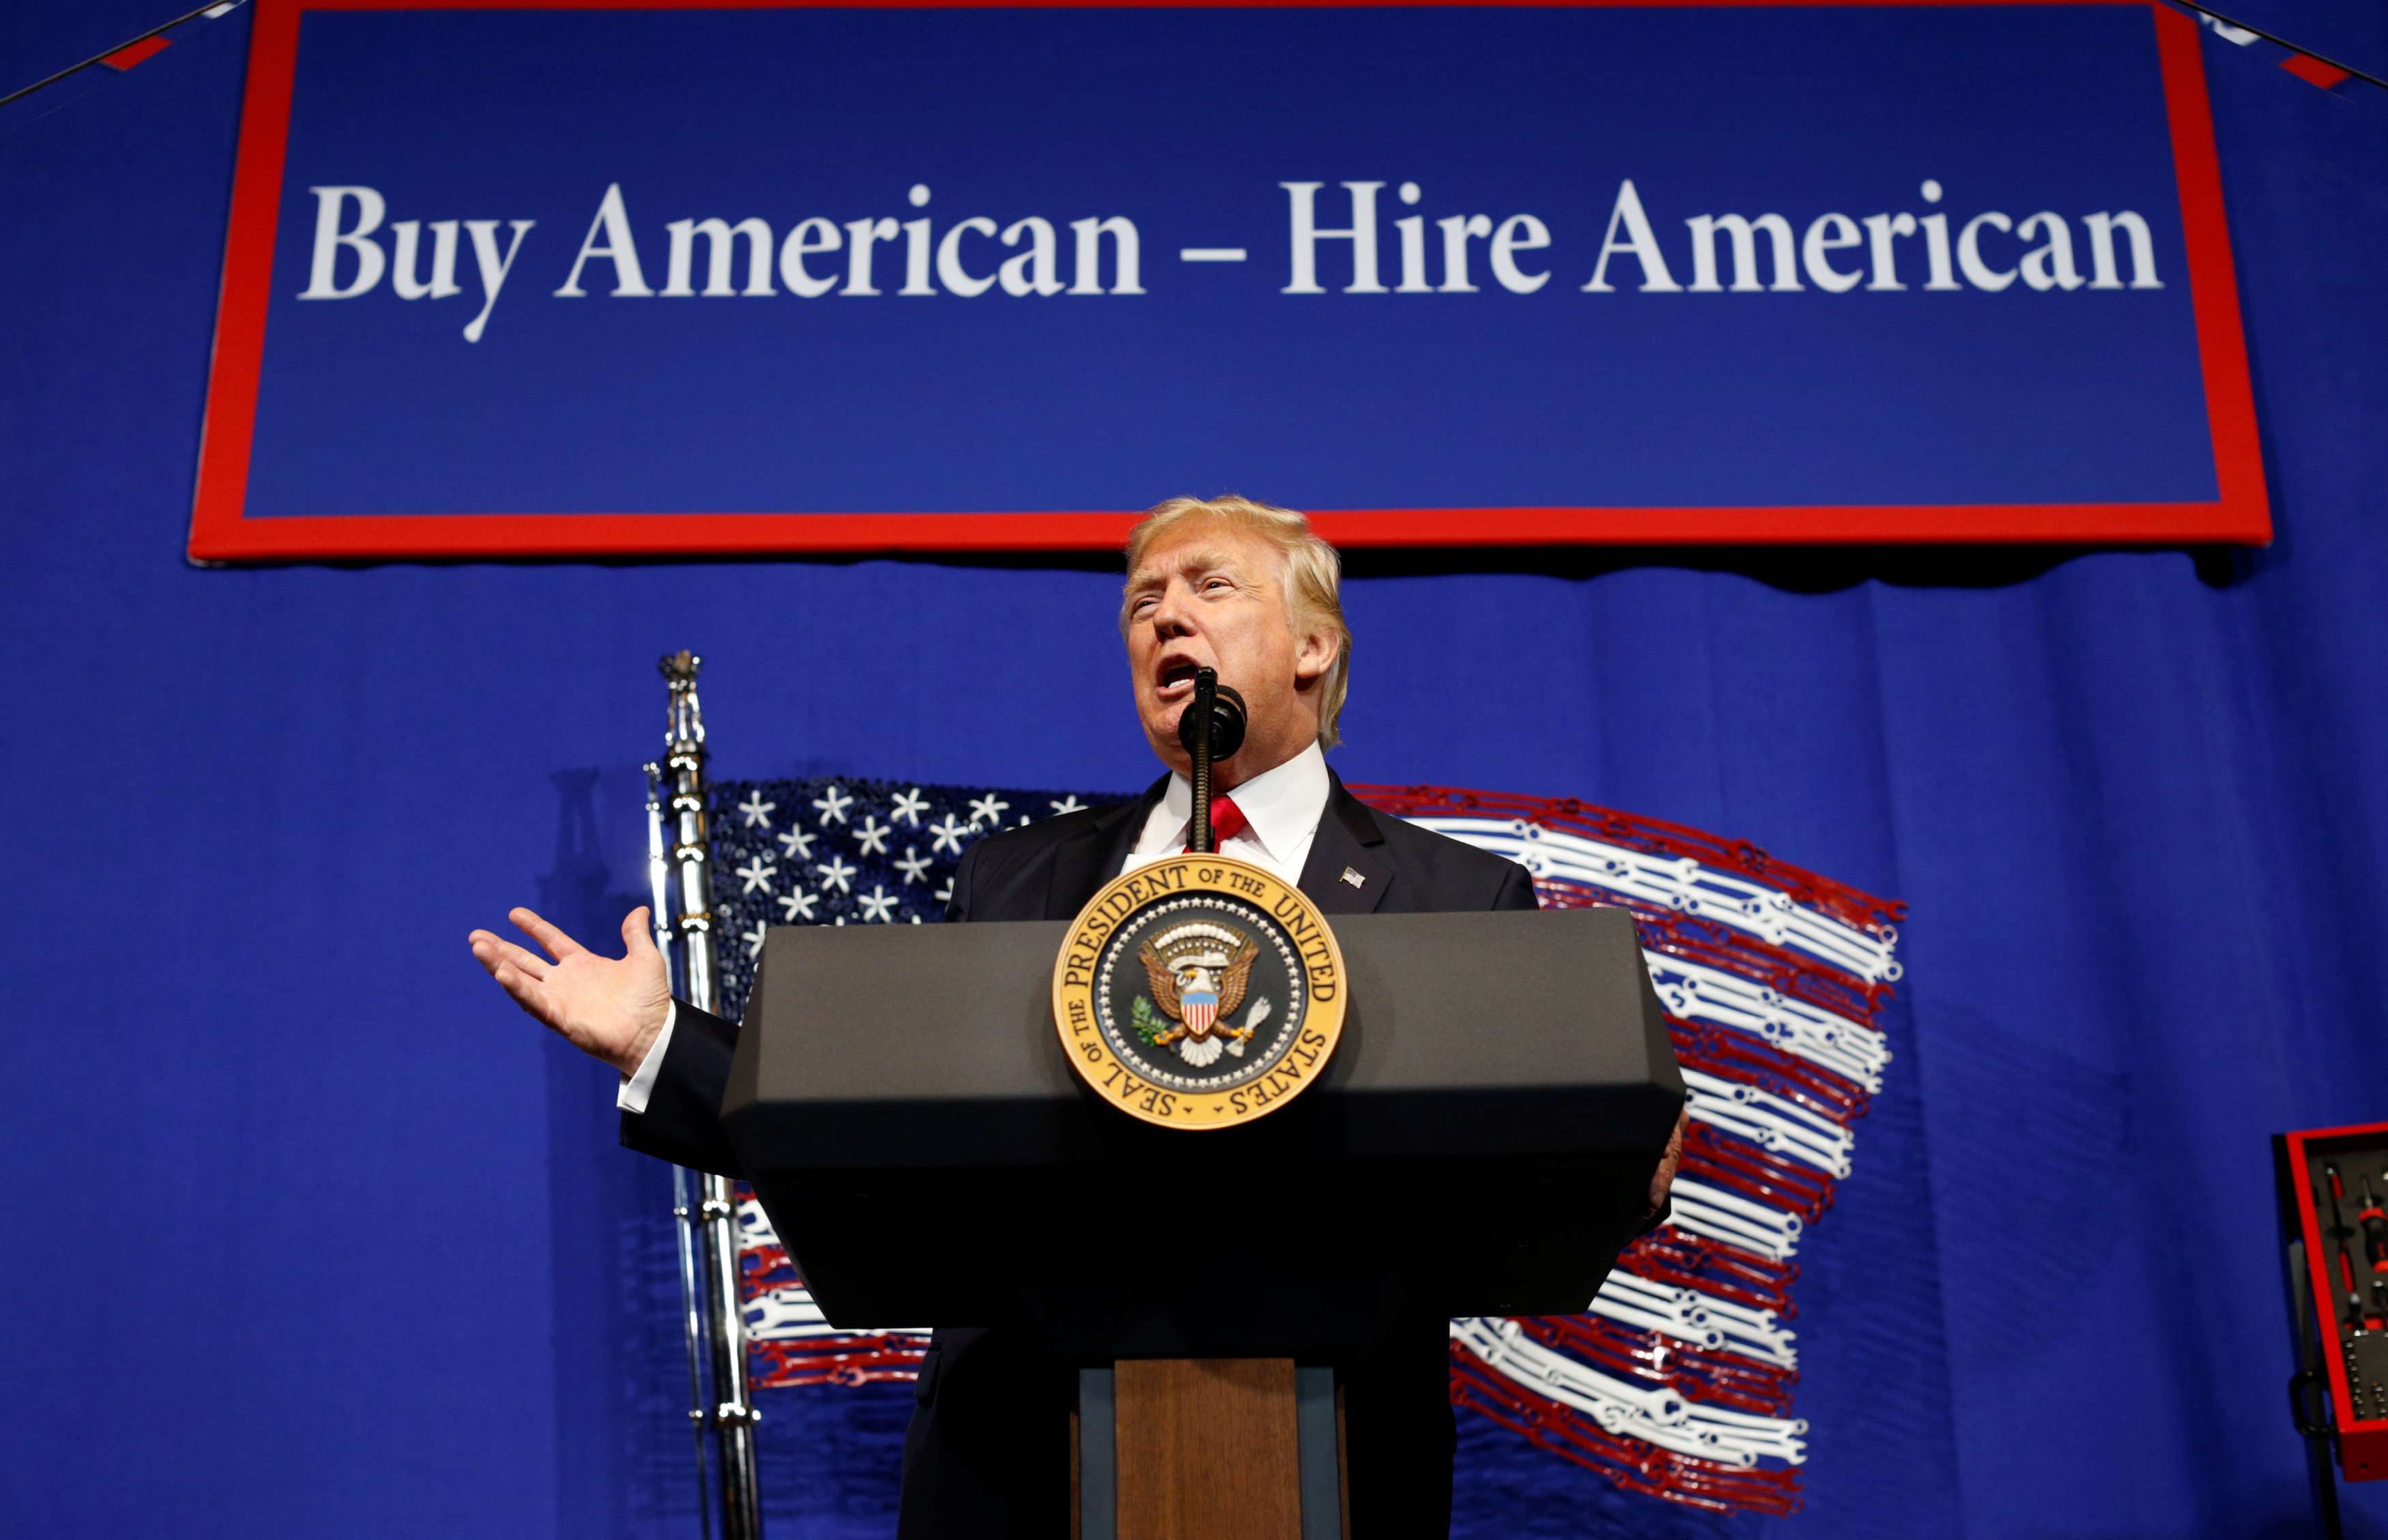 US President Donald Trump has ordered a review of the H-1B visa programme, which is relied on by technology firms to bring in high-skilled foreign workers. Photo: Reuters